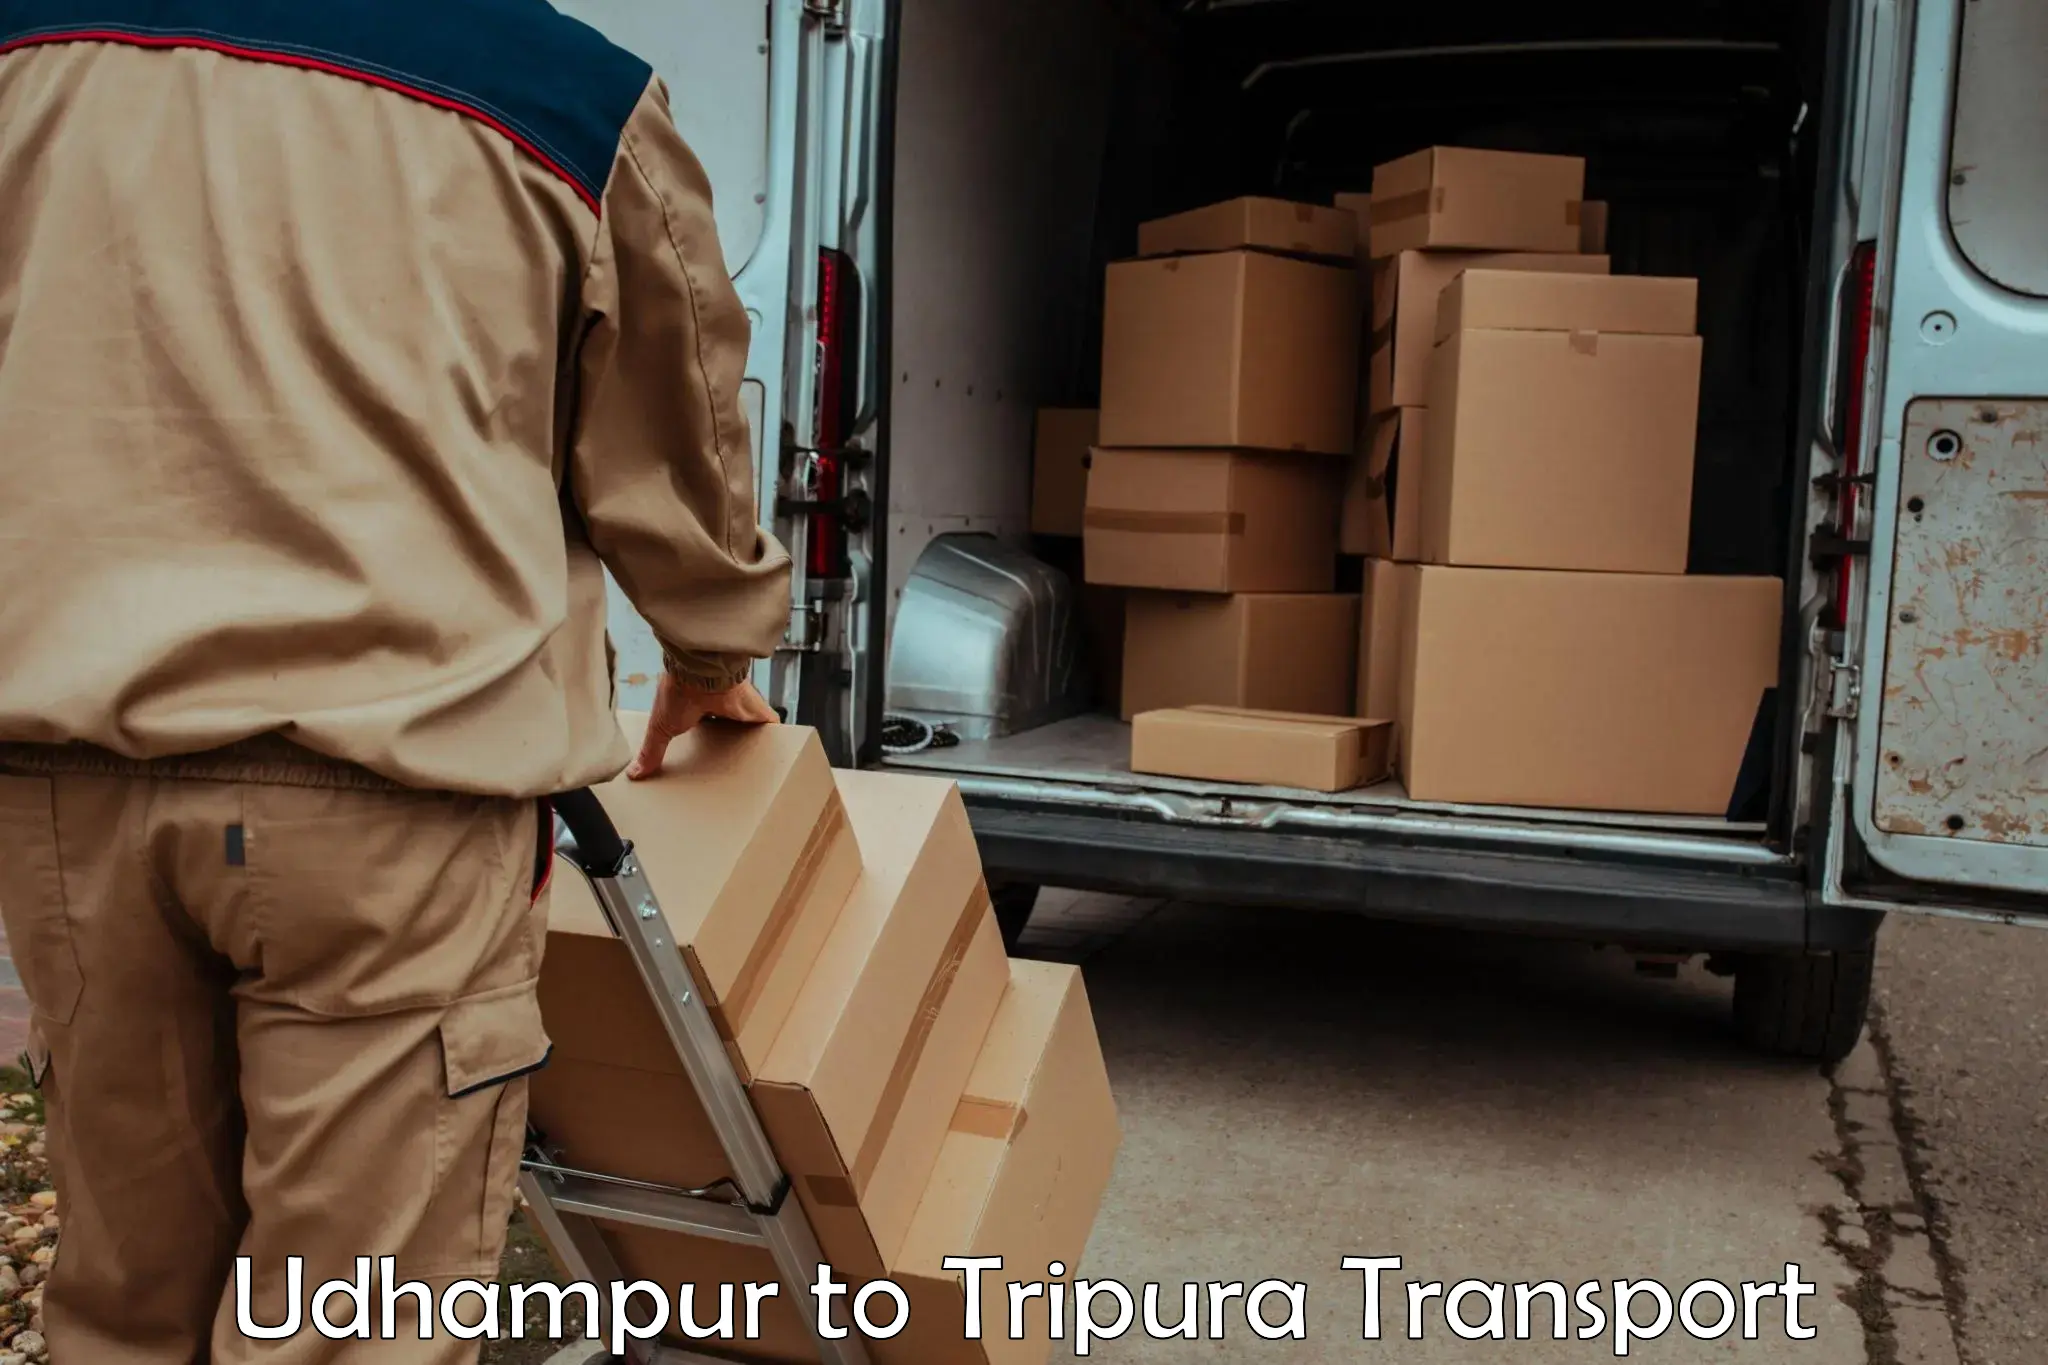 Air freight transport services in Udhampur to Bishalgarh